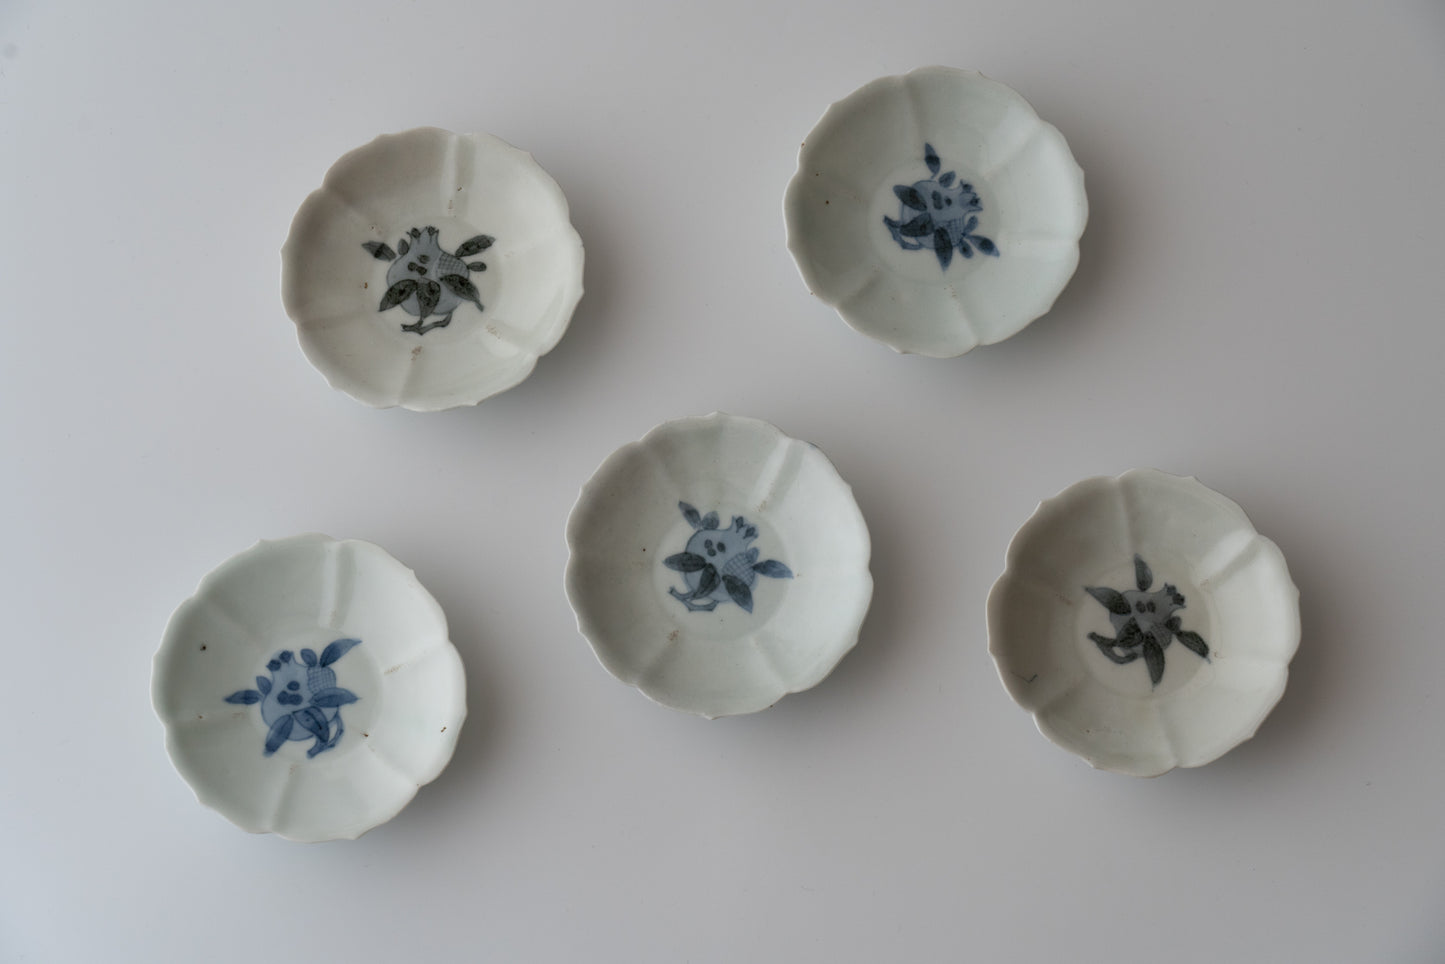 A set of five small dishes with pomegranate design, Early Imari ware